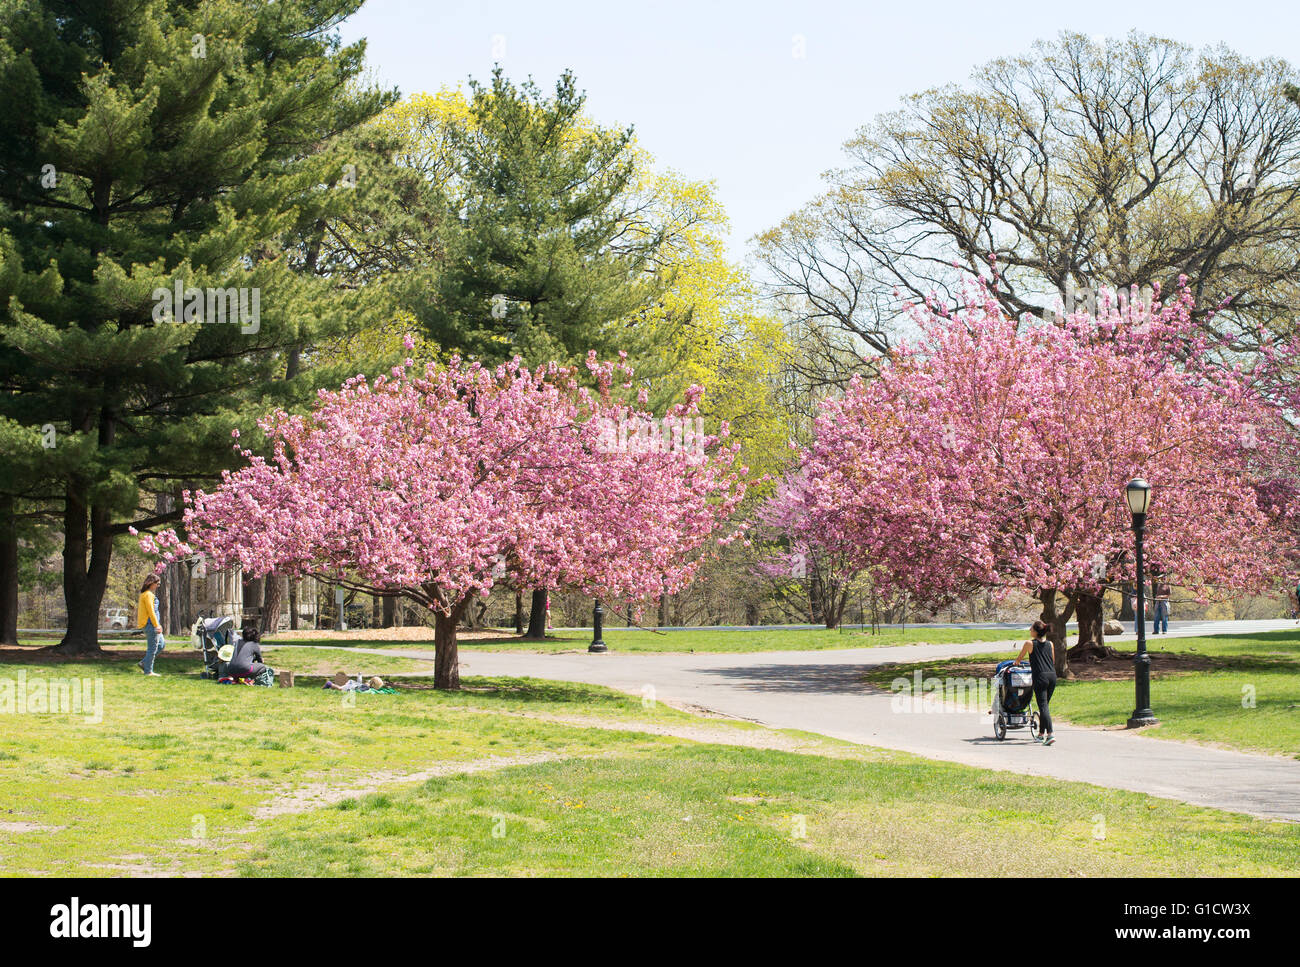 Women with strollers passing cherry blossom in Prospect Park, Brooklyn, New York, USA Stock Photo